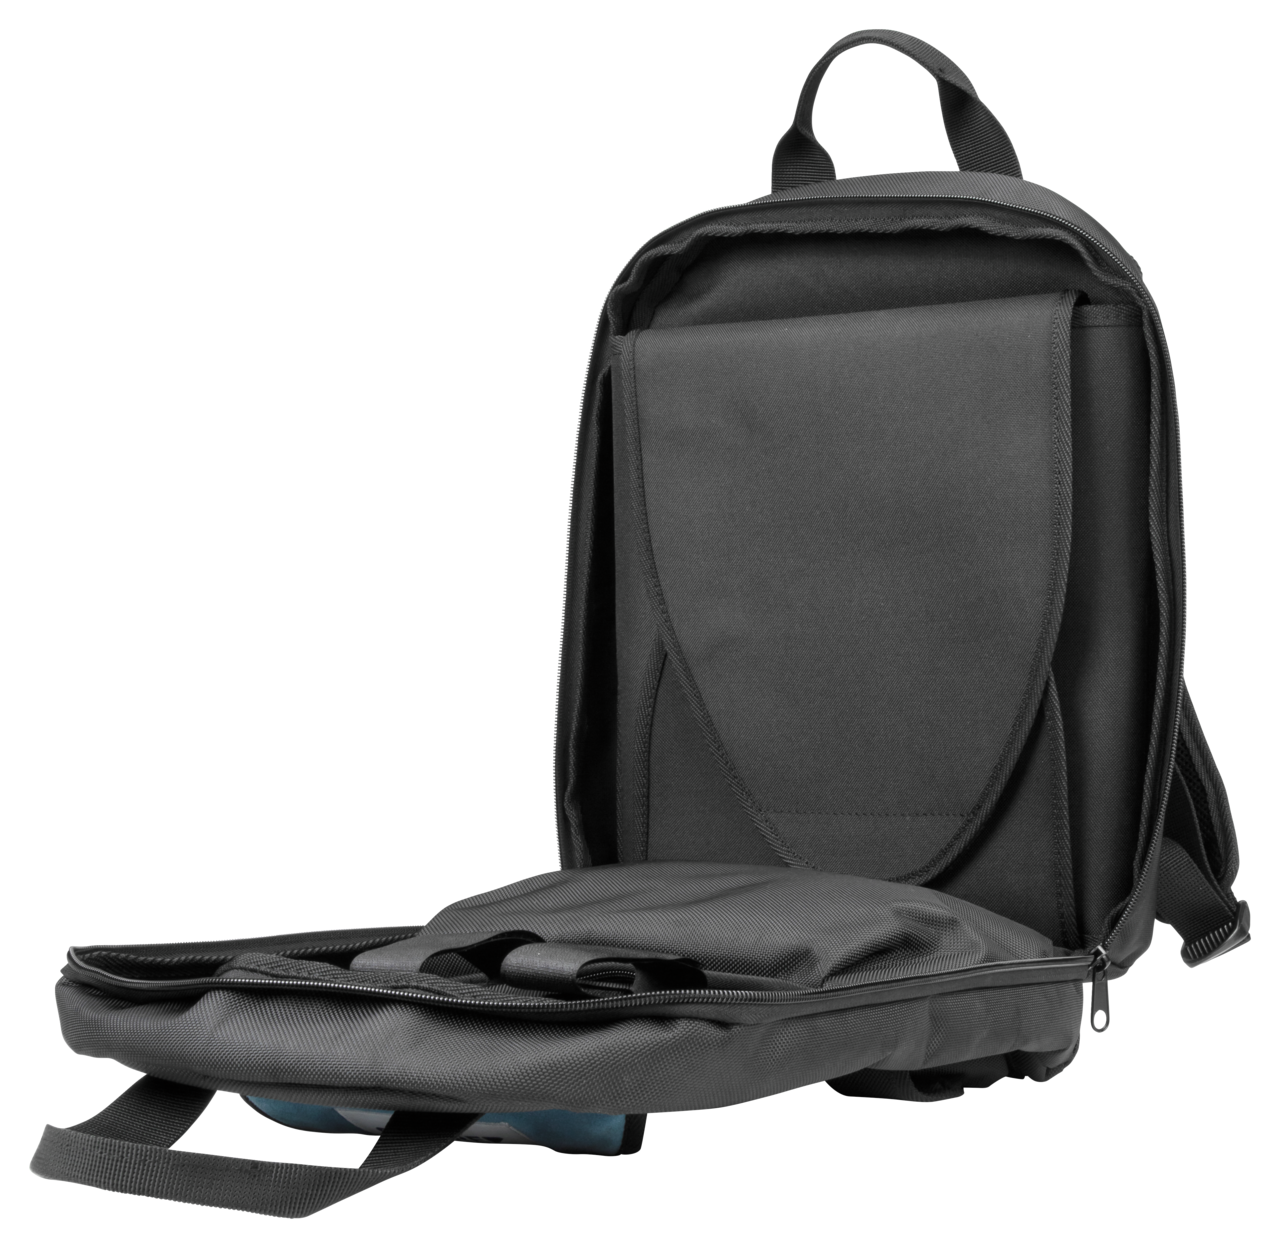 GEDORE WT 1056 12 - SOFT tool backpack (1818252)